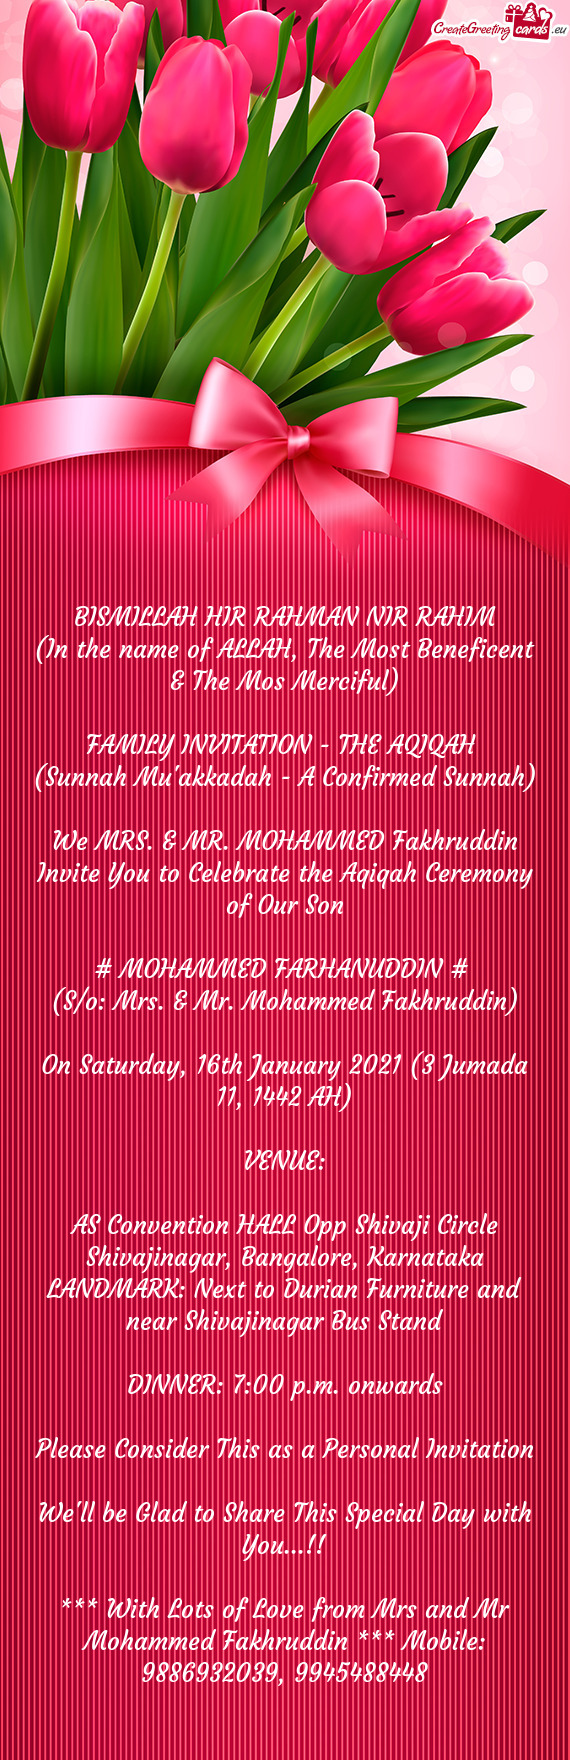 We MRS. & MR. MOHAMMED Fakhruddin Invite You to Celebrate the Aqiqah Ceremony of Our Son